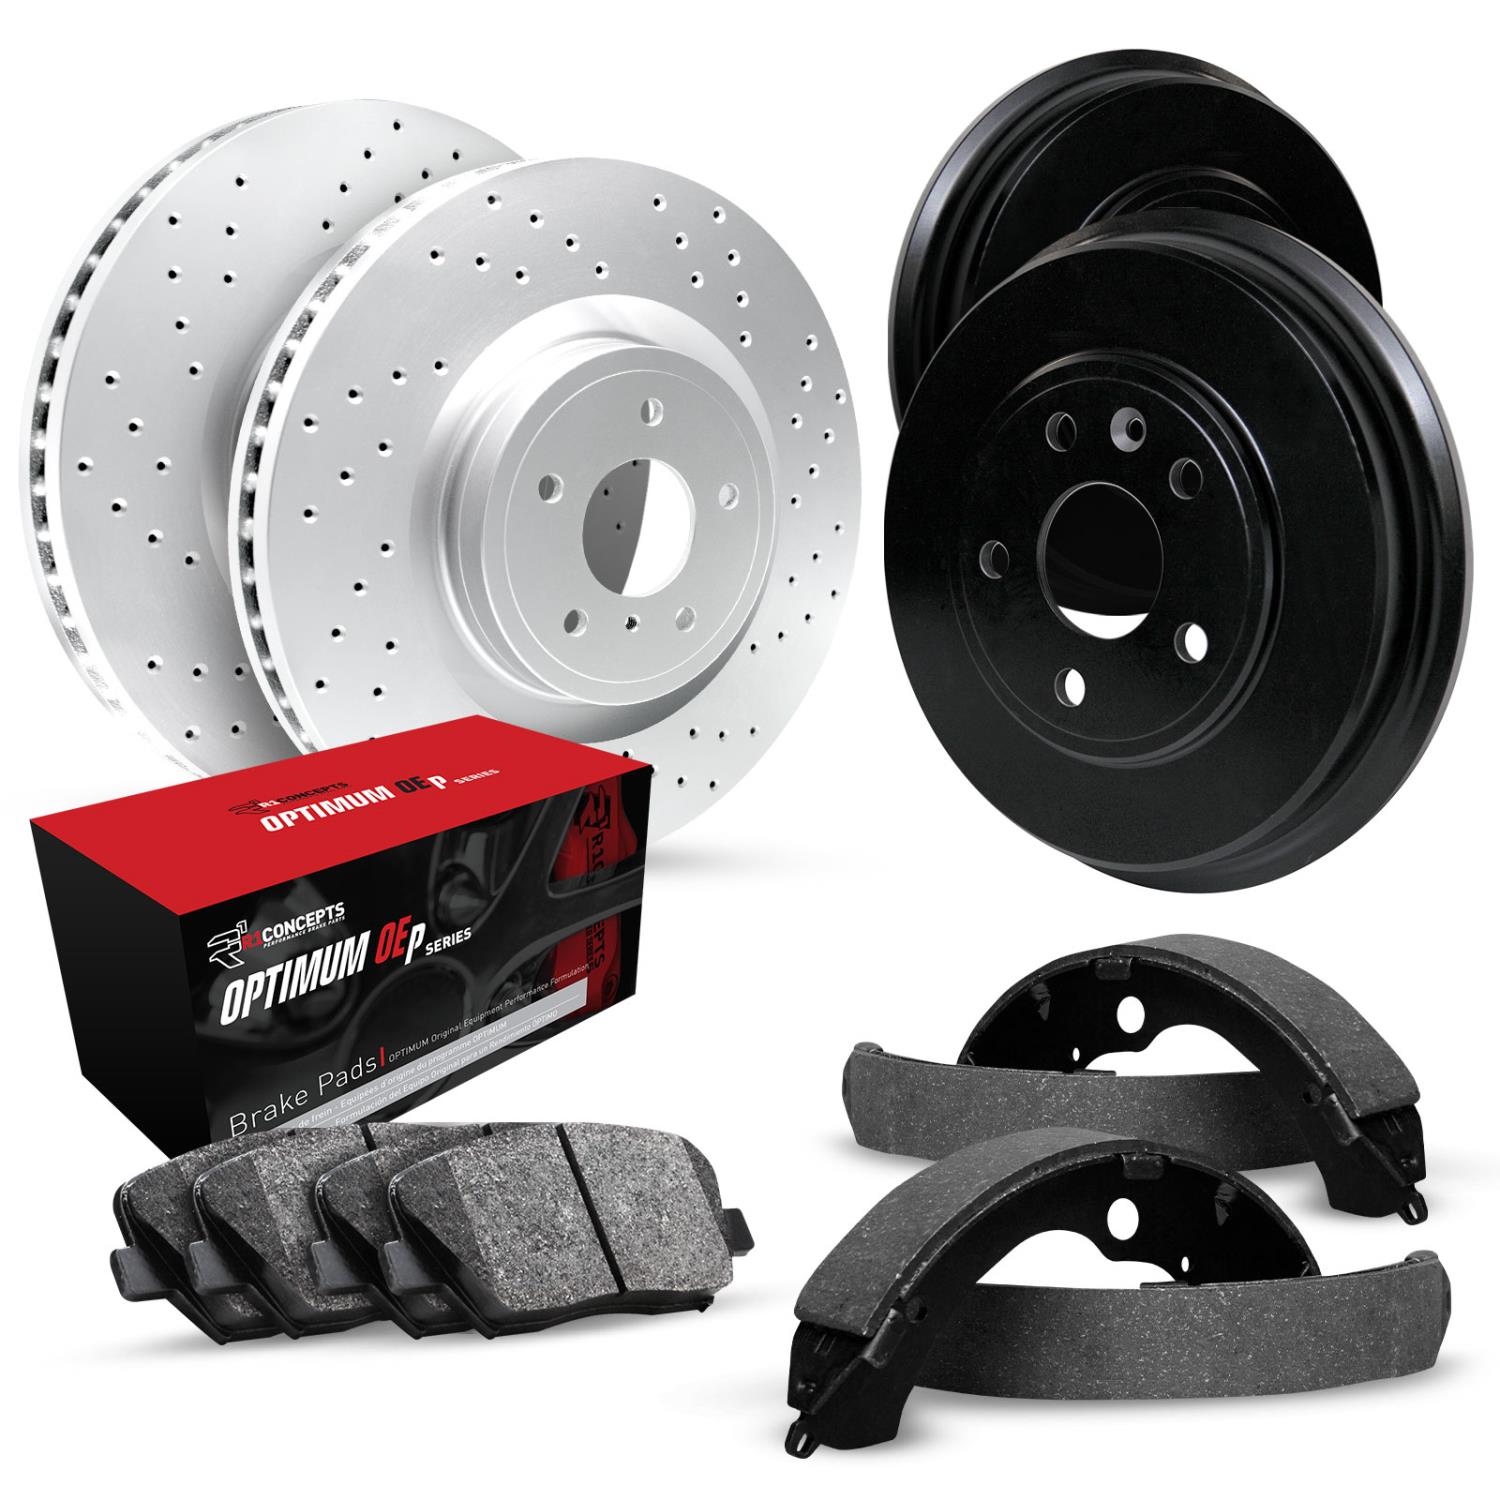 GEO-Carbon Drilled Brake Rotor & Drum Set w/Optimum OE Pads & Shoes, 2008-2015 Mitsubishi, Position: Front & Rear